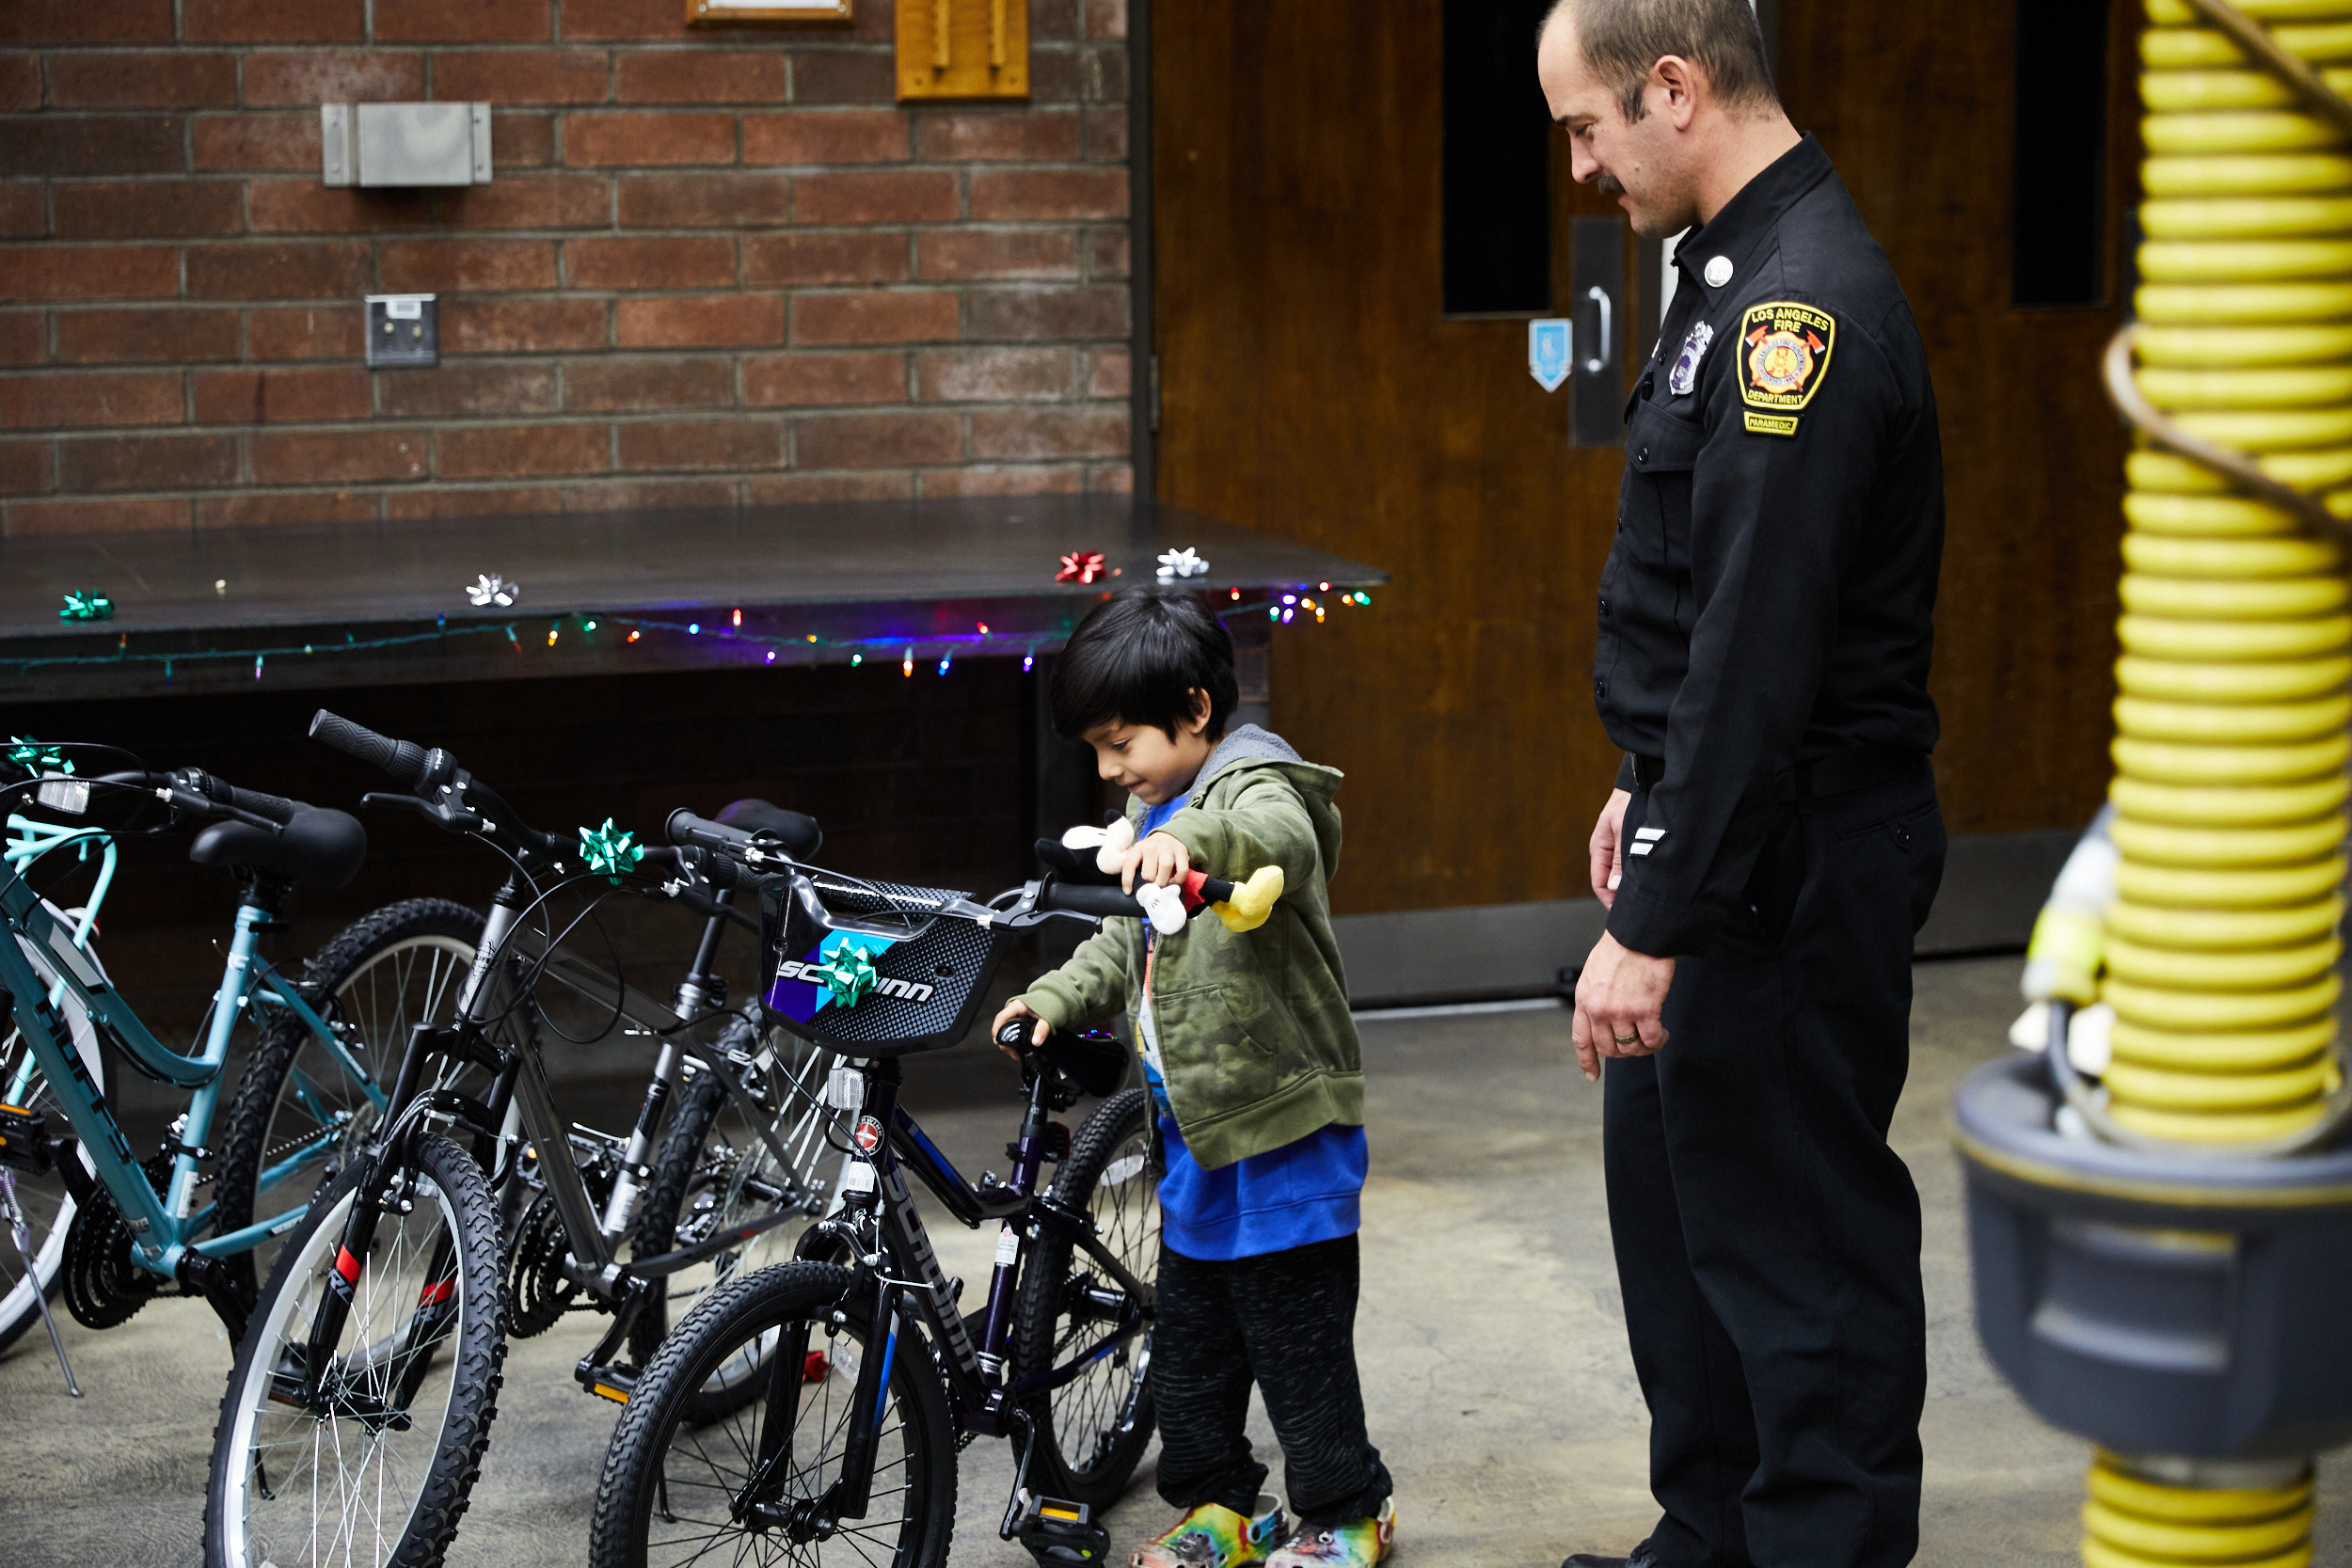 Fire captain pictured with young boy smiling while looking at new bike